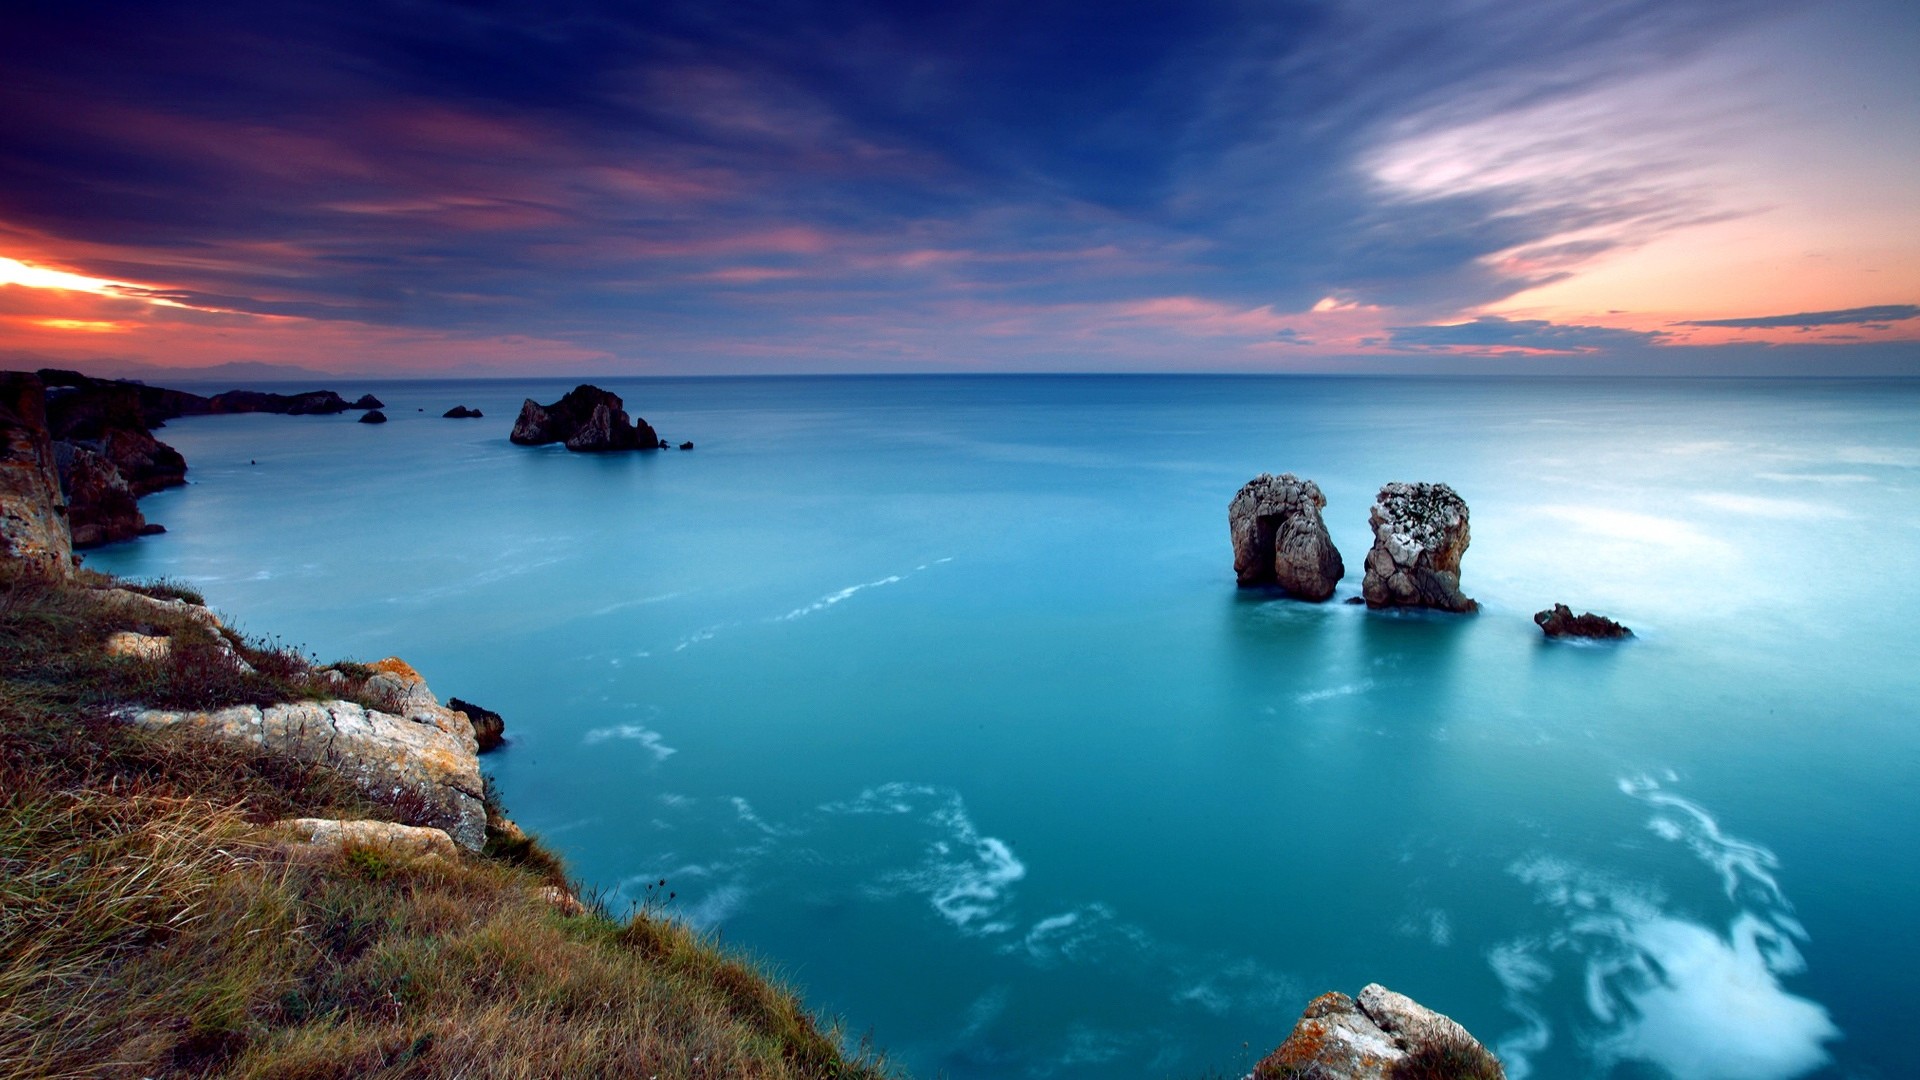 1920x1080 the ocean wallpapers category of free hd wallpapers beautiful ocean .